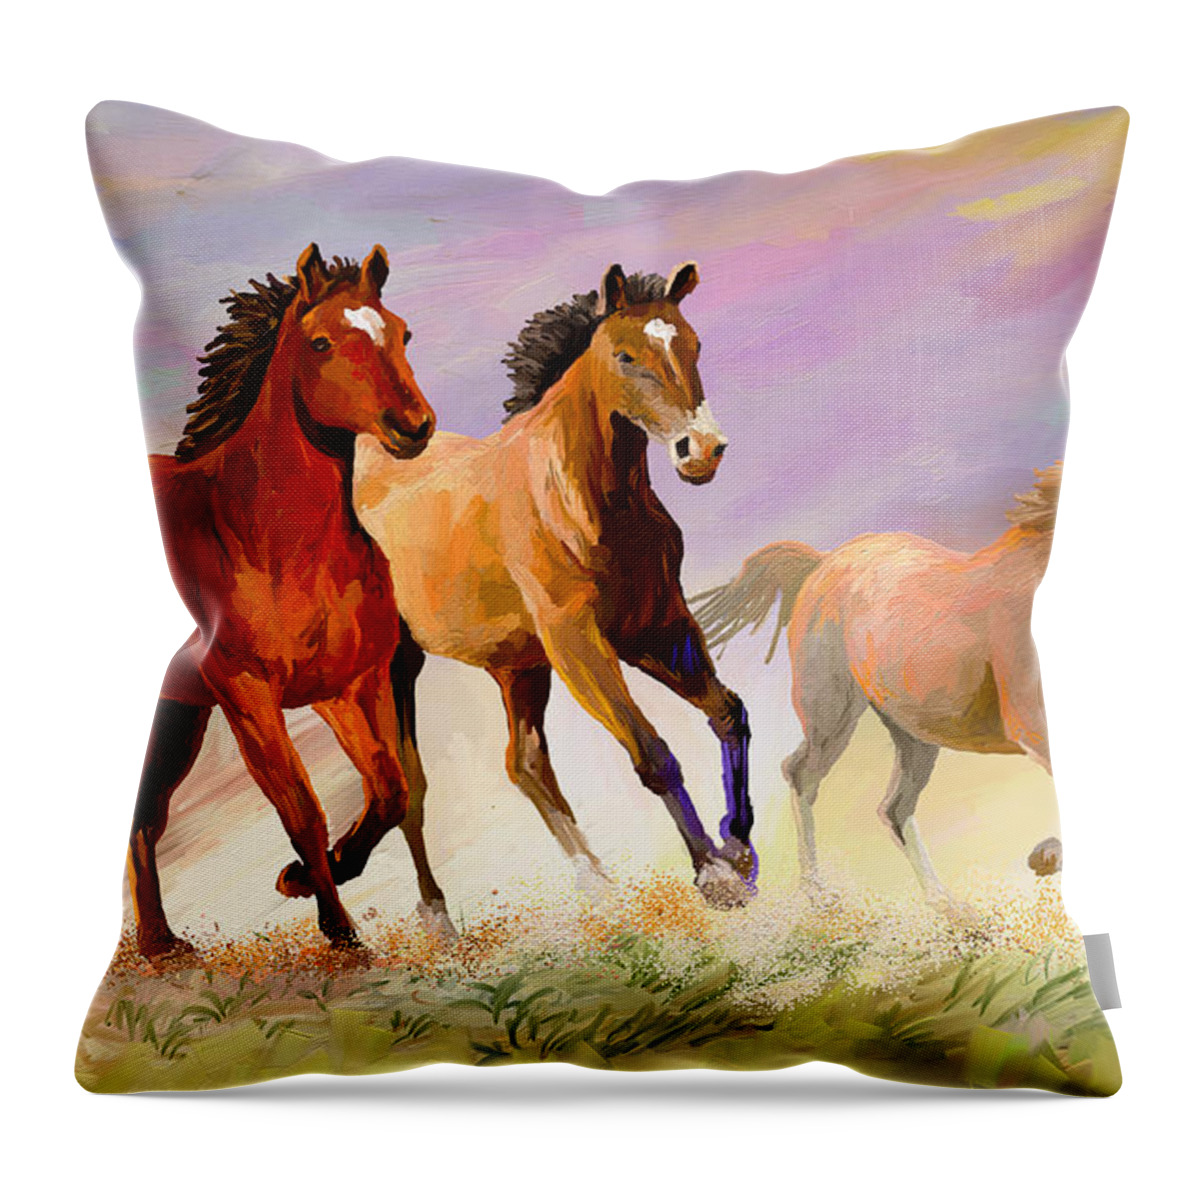 Horse Throw Pillow featuring the painting Galloping Horses by Anthony Mwangi